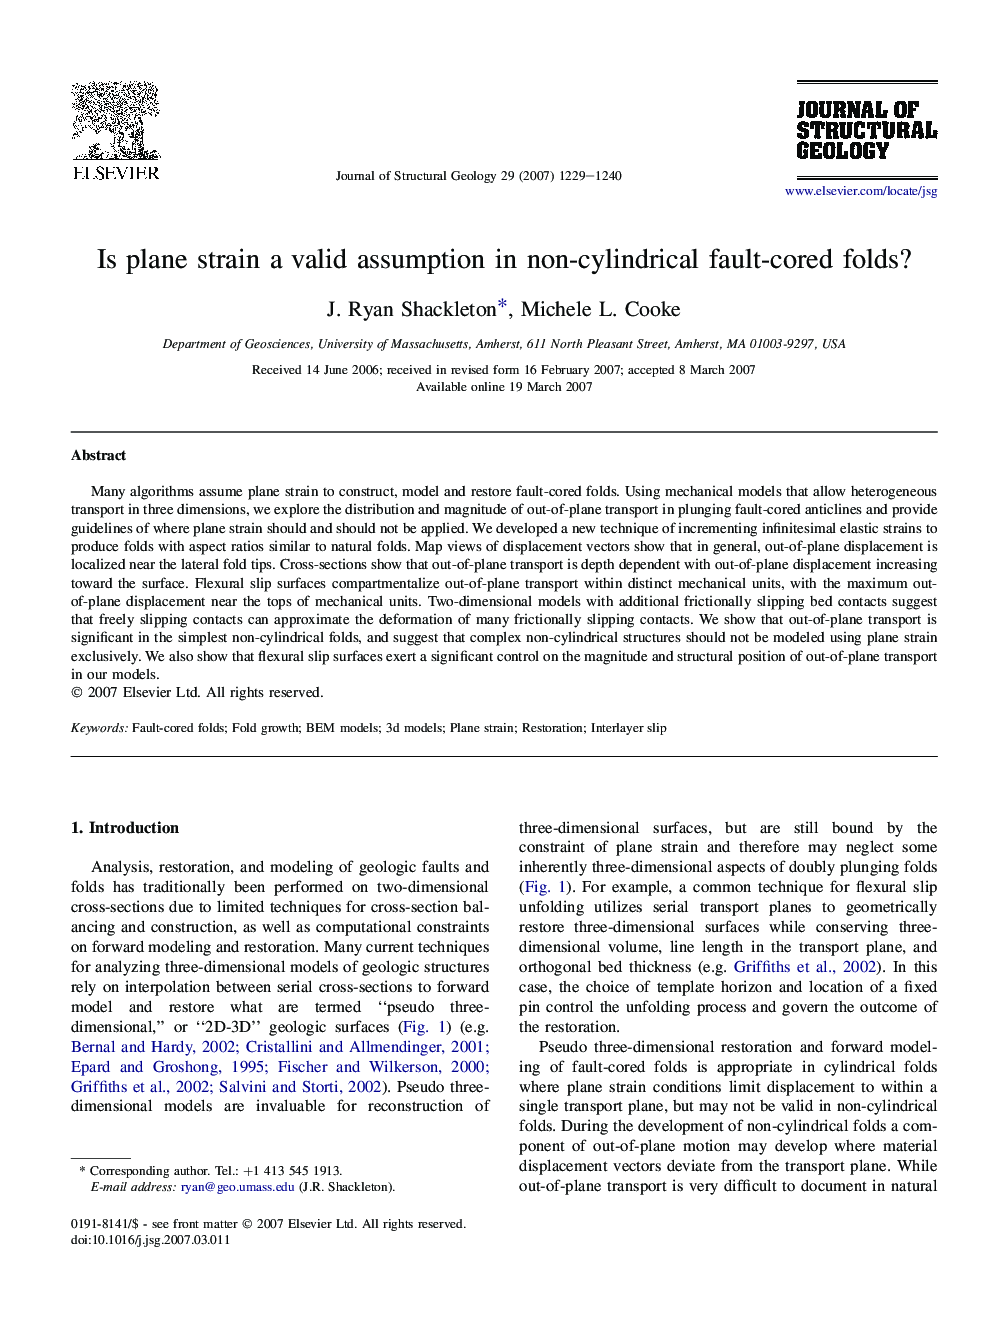 Is plane strain a valid assumption in non-cylindrical fault-cored folds?